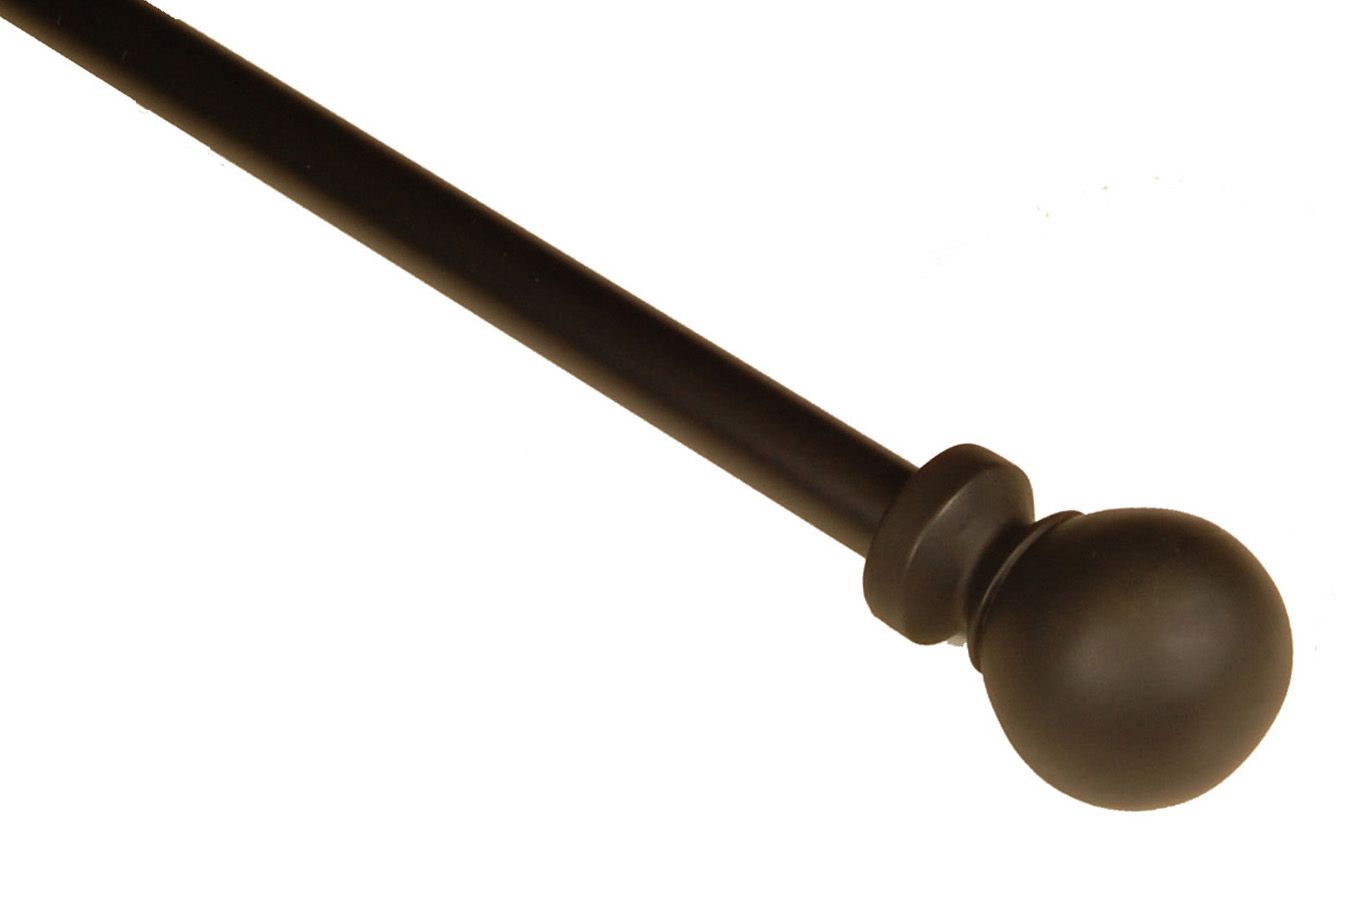 BCL Classic Ball Curtain Rod, Black Finish, 48-inch to 86-inch